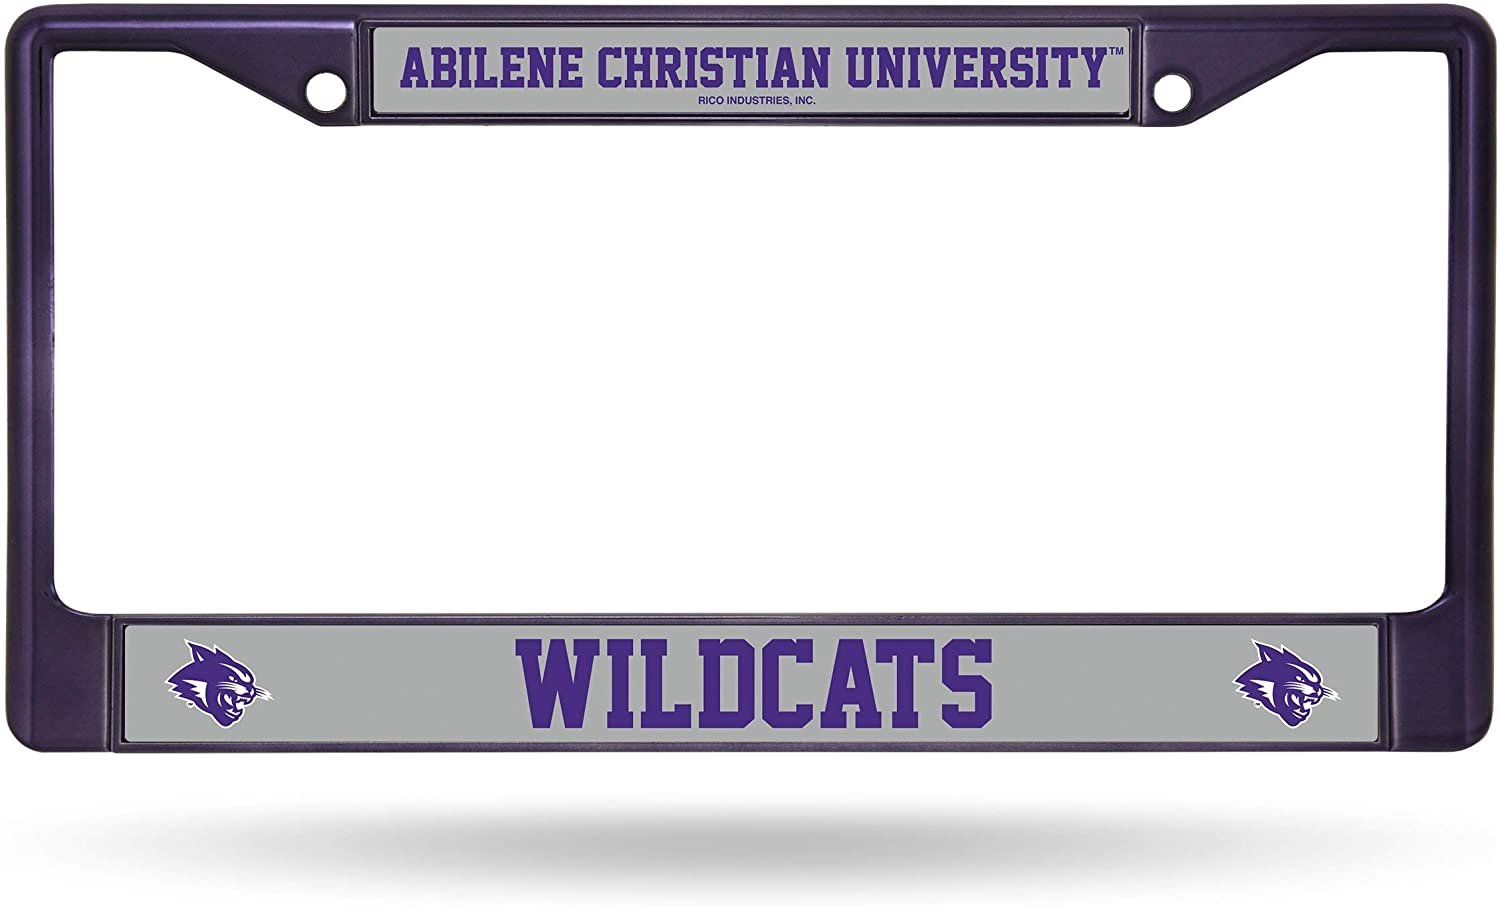 Abilene Christian University Wildcats License Plate Frame Tag Cover Colored 6x12 Inches